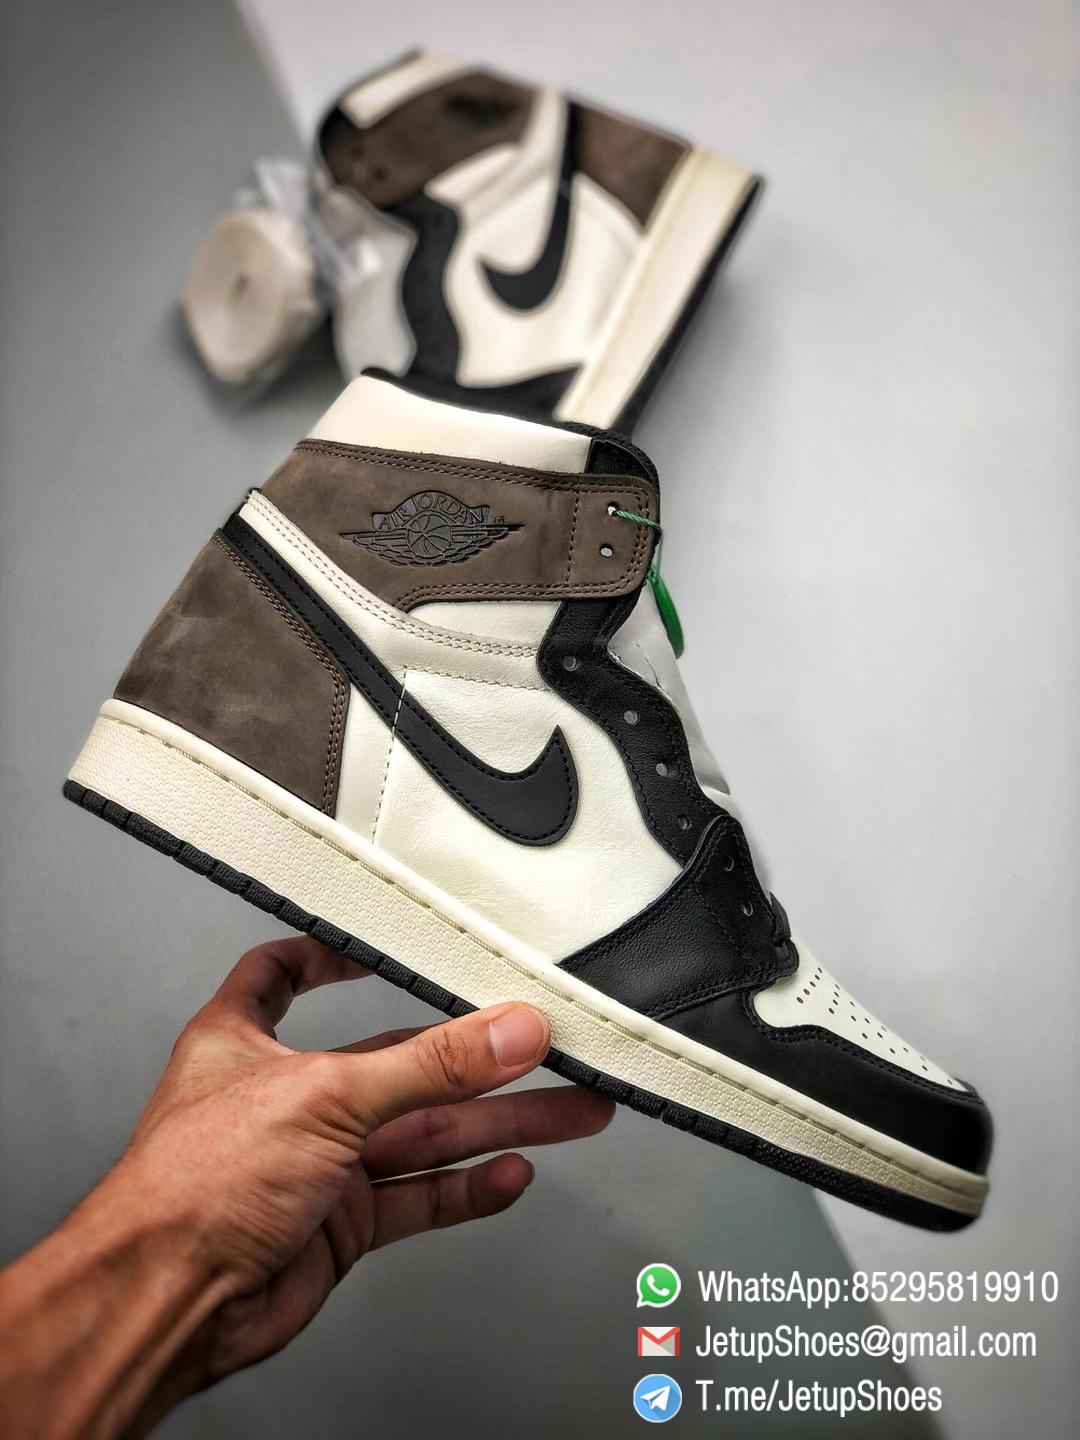 Best Replica Air Jordan 1 Retro High OG Dark Mocha Off white Leather Base and Black Overylays Top Quality Sneakers 03